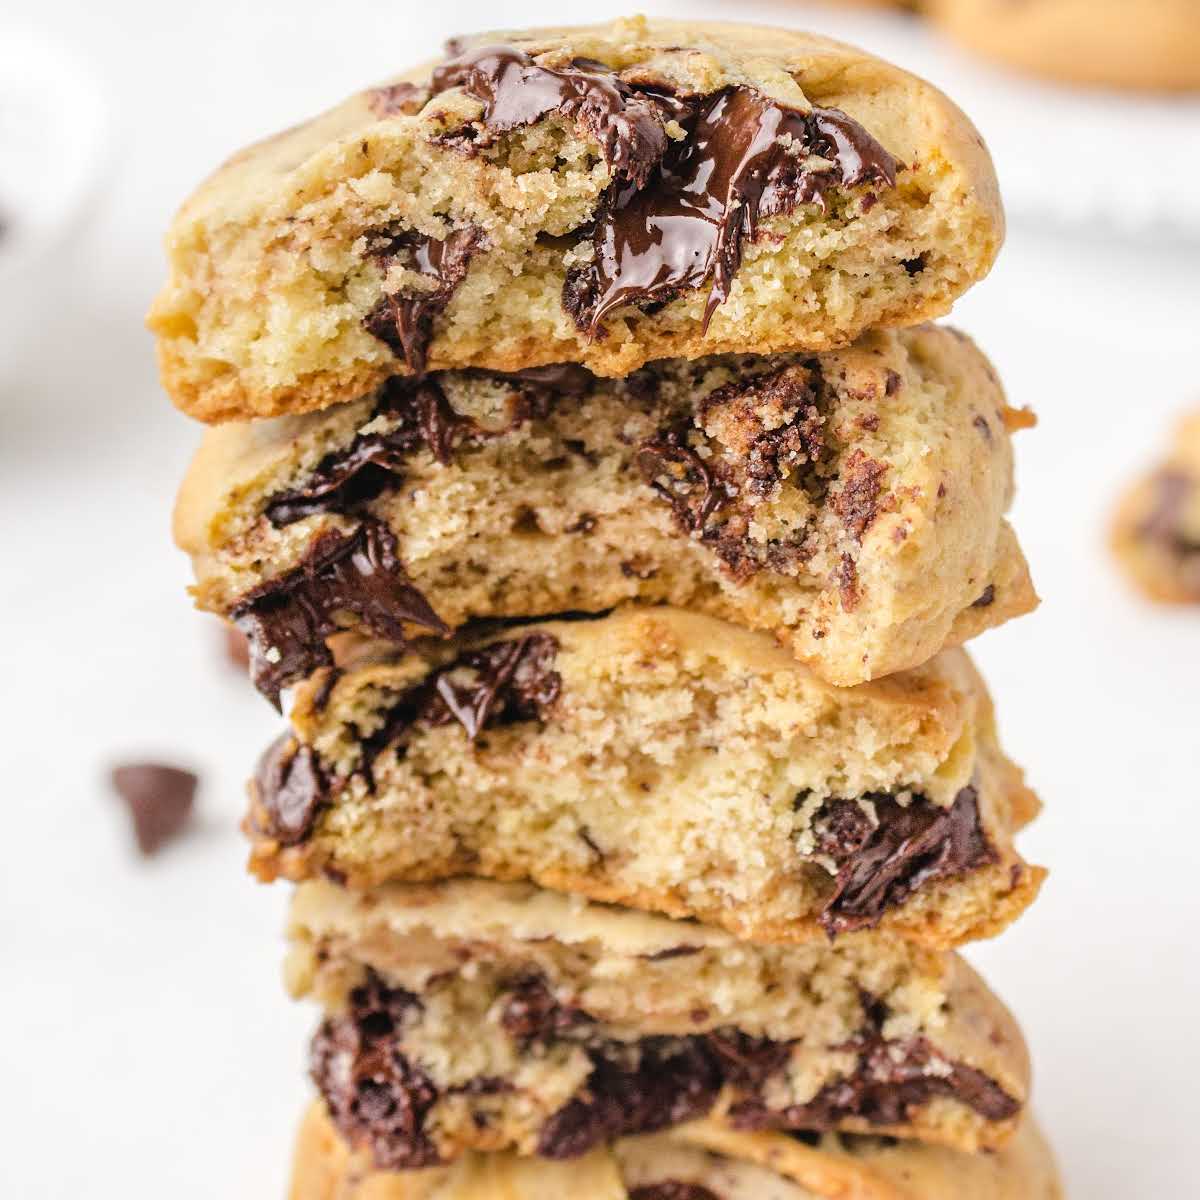 Rich & Tangy Cream Cheese Chocolate Chip Cookies - Creations by Kara